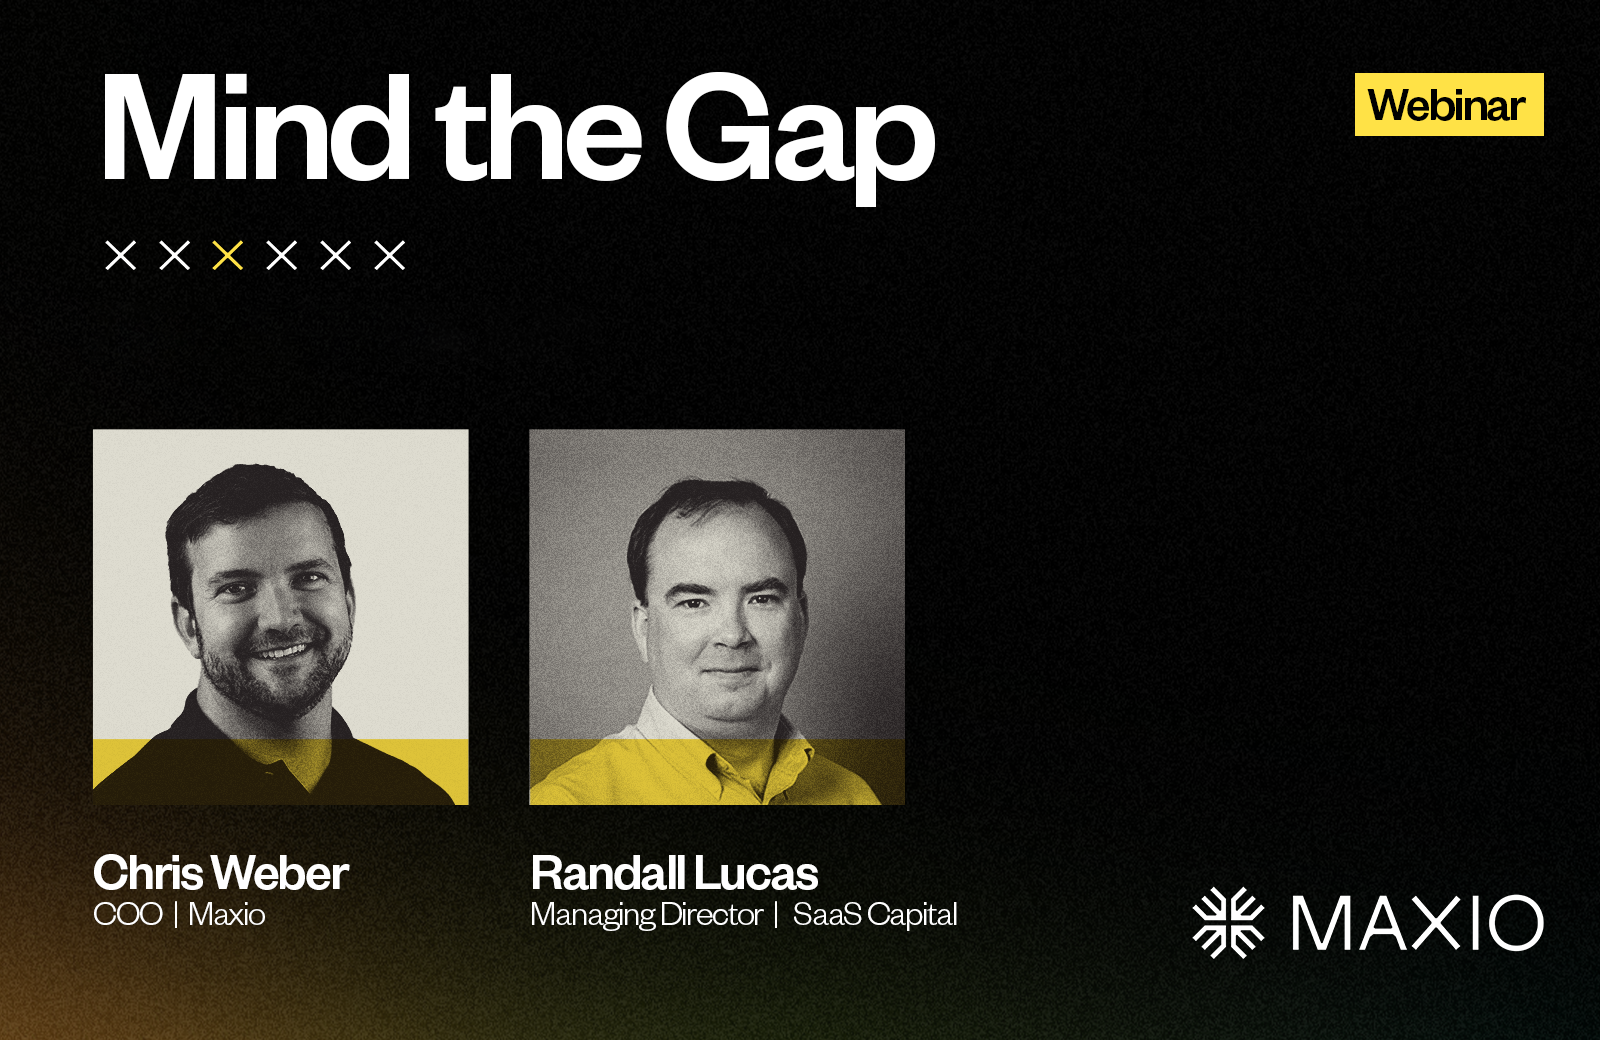 An image including the podcast title and speakers: Mind the Gap, presented by Chris Weber and Randall Lucas.